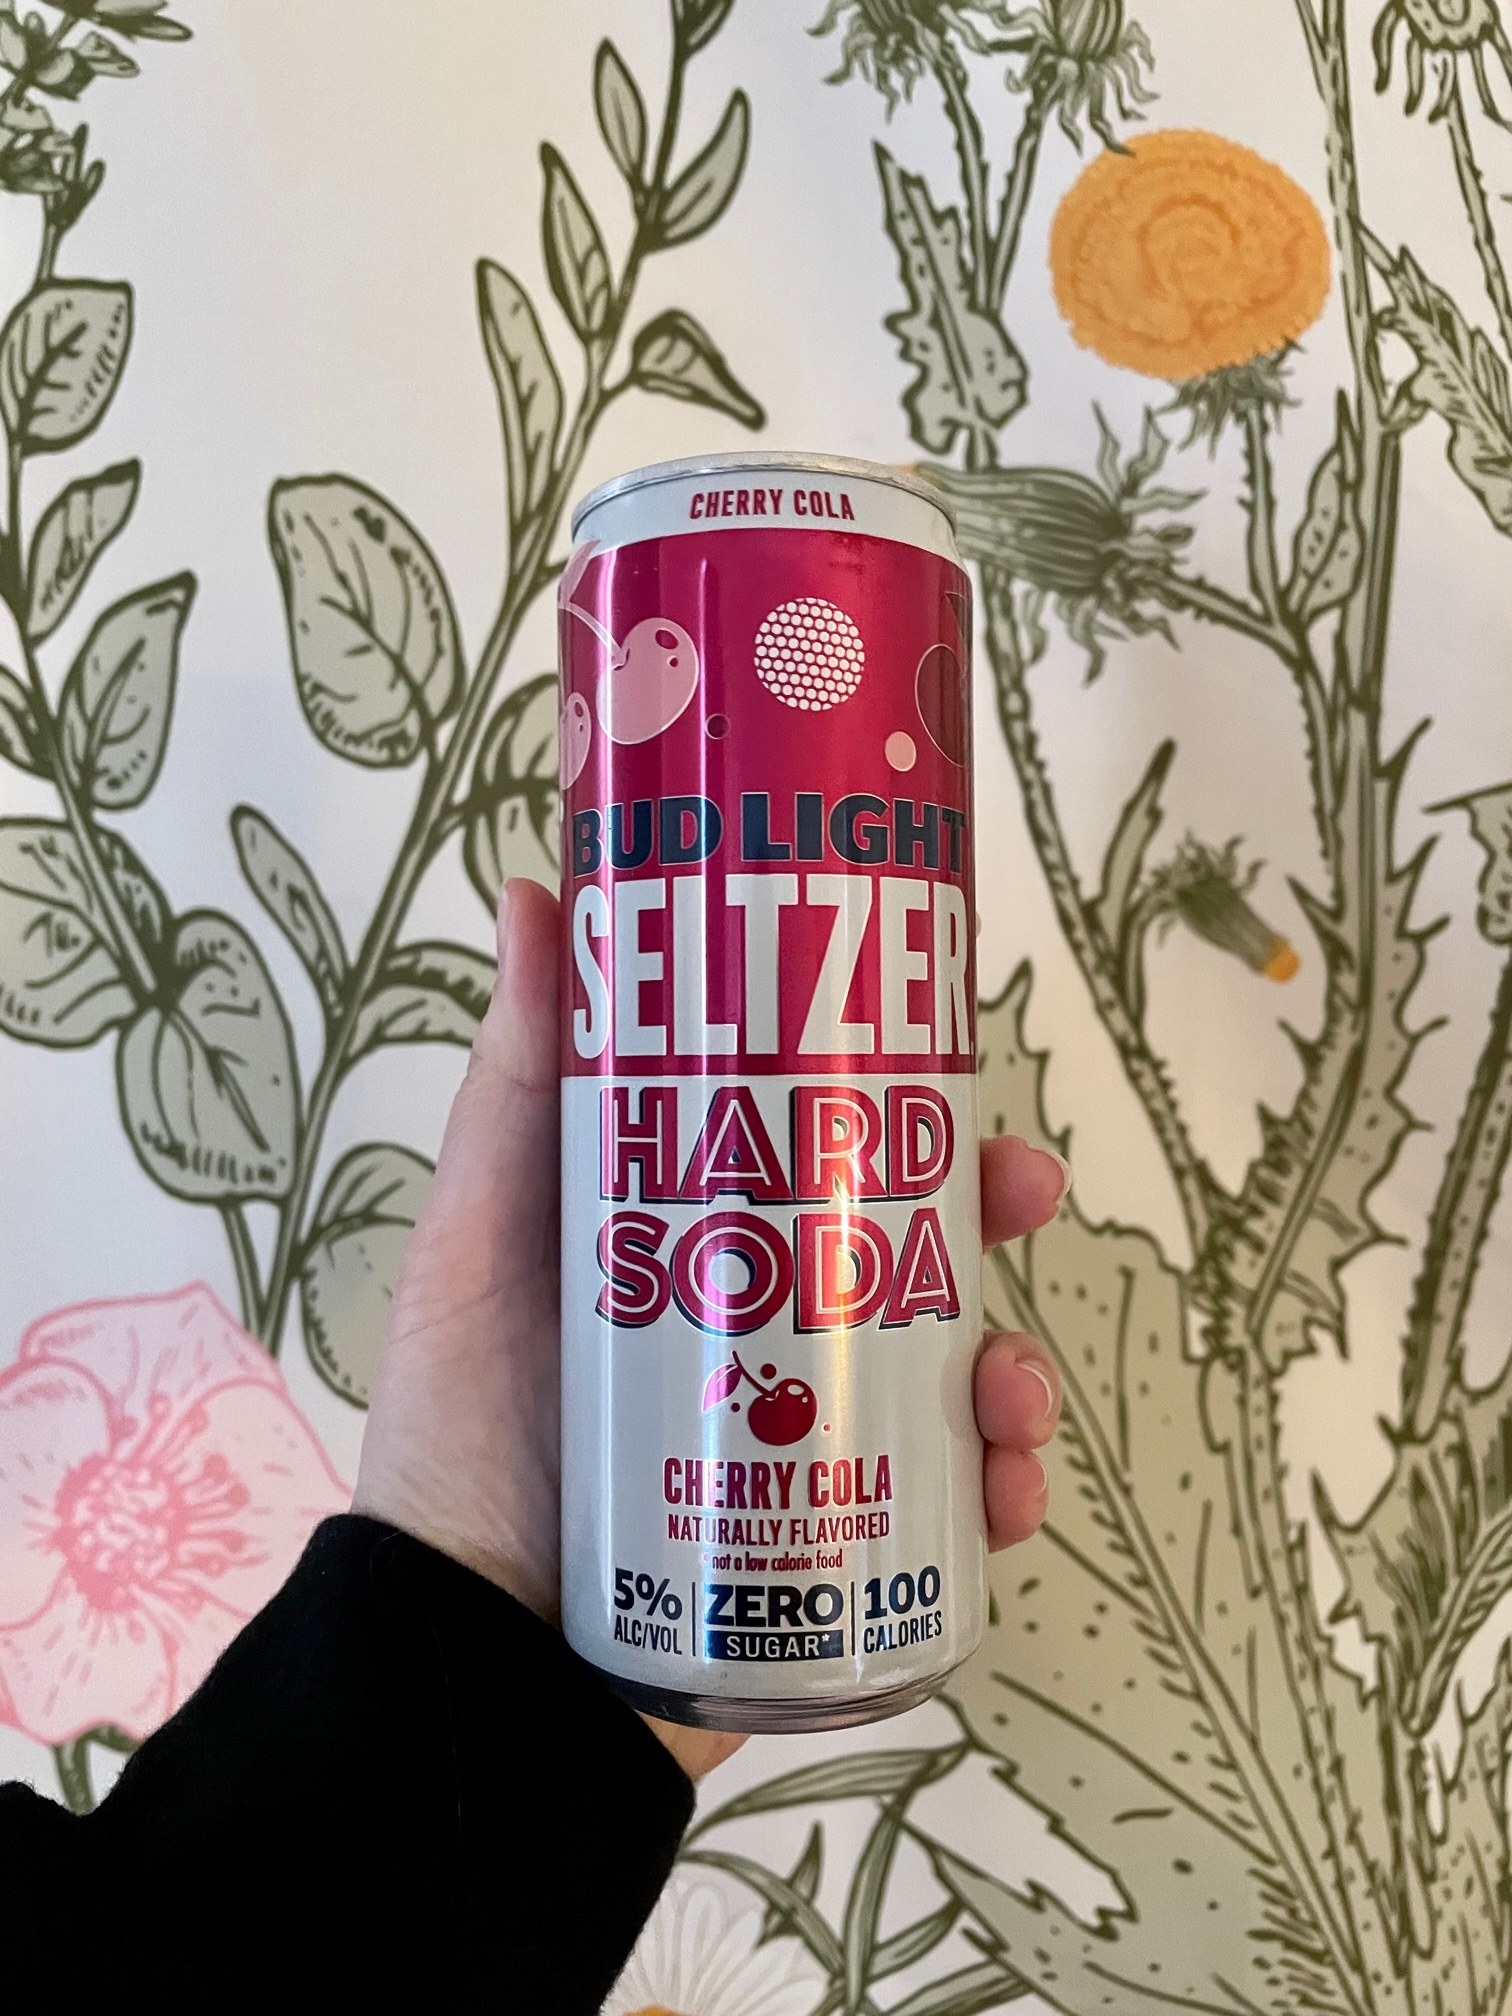 can of cherry cola seltzer